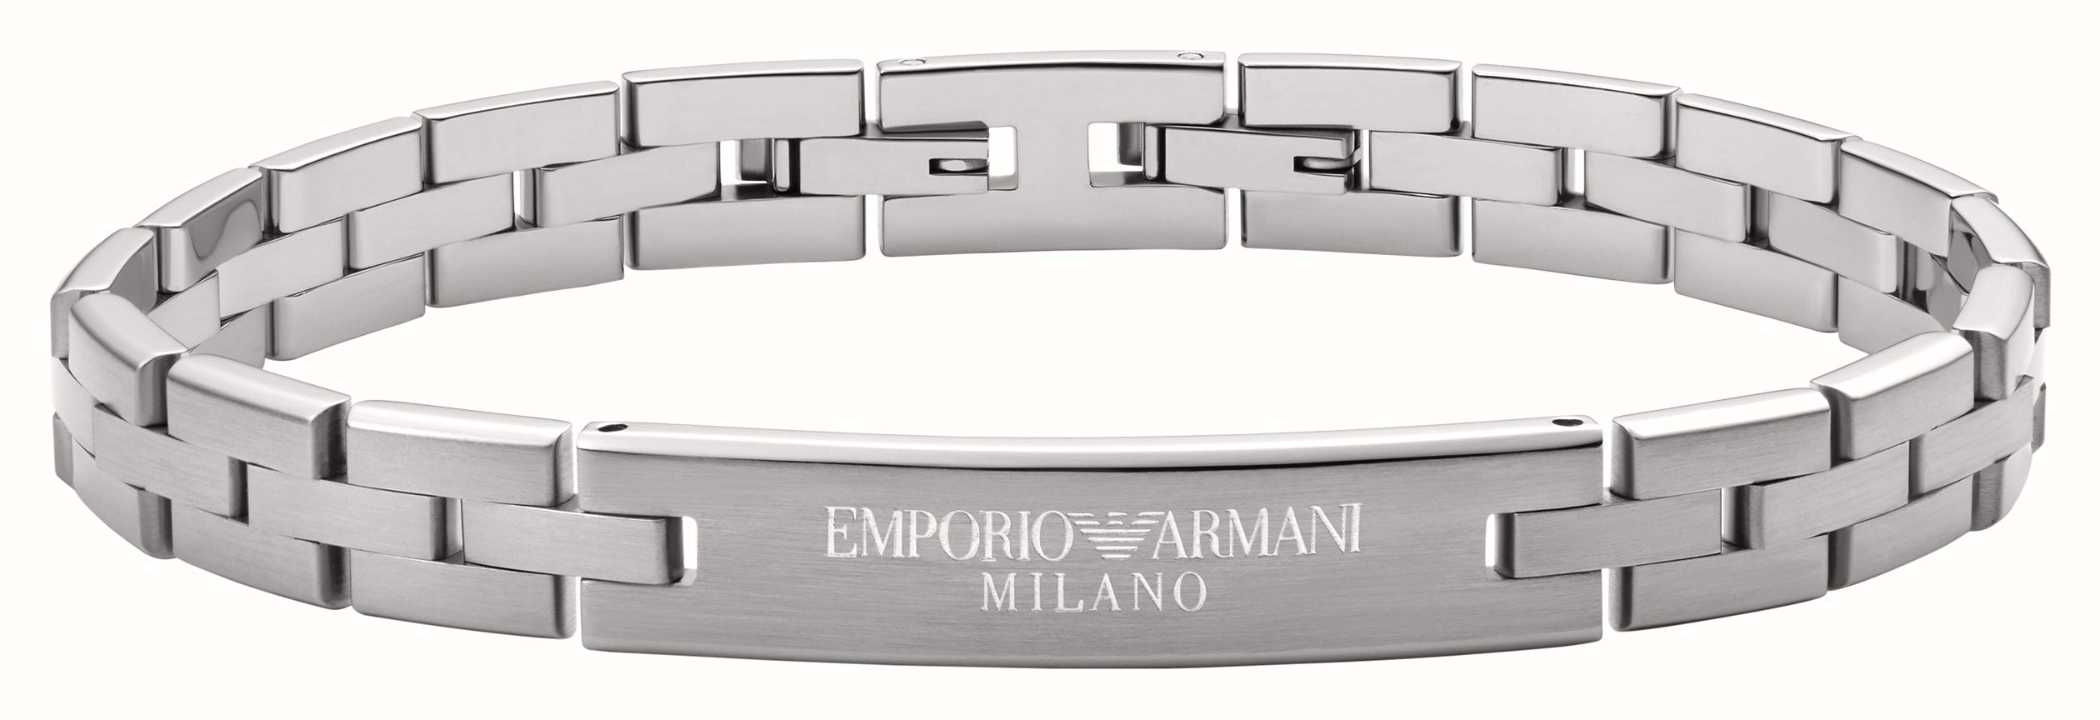 Emporio Armani Men's Stainless Steel Chain Link Bracelet EGS2814040 - First  Class Watches™ IRL